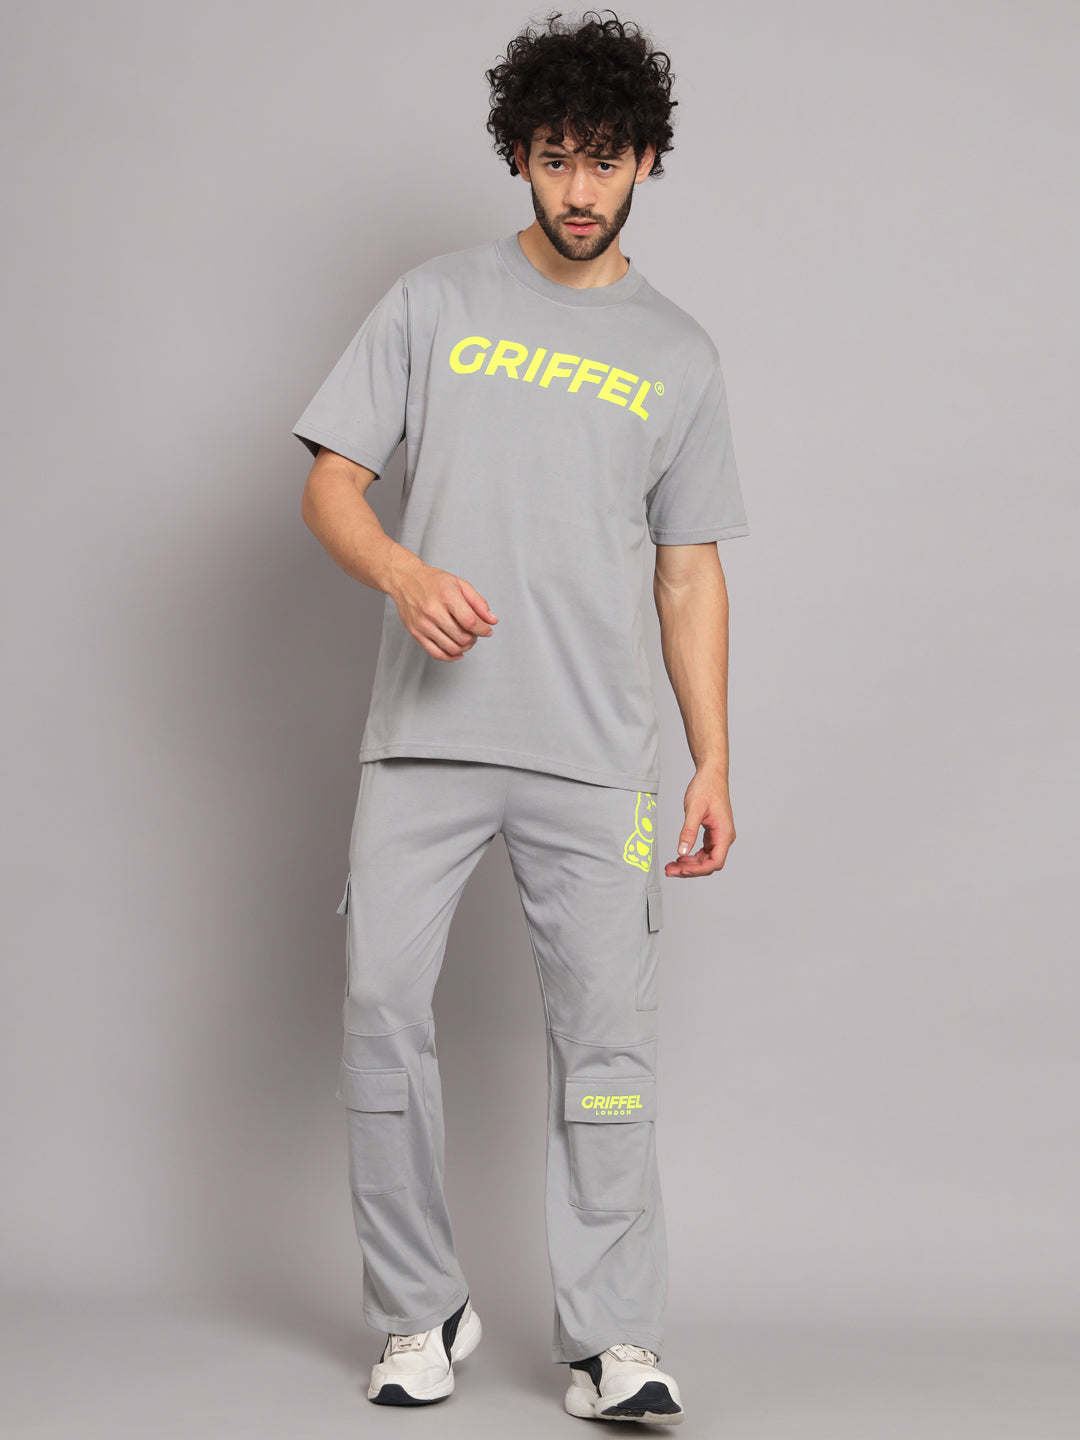 GRIFFEL Men Printed Steel Grey Loose fit T-shirt and Bell Bottom Trackpant Set - griffel